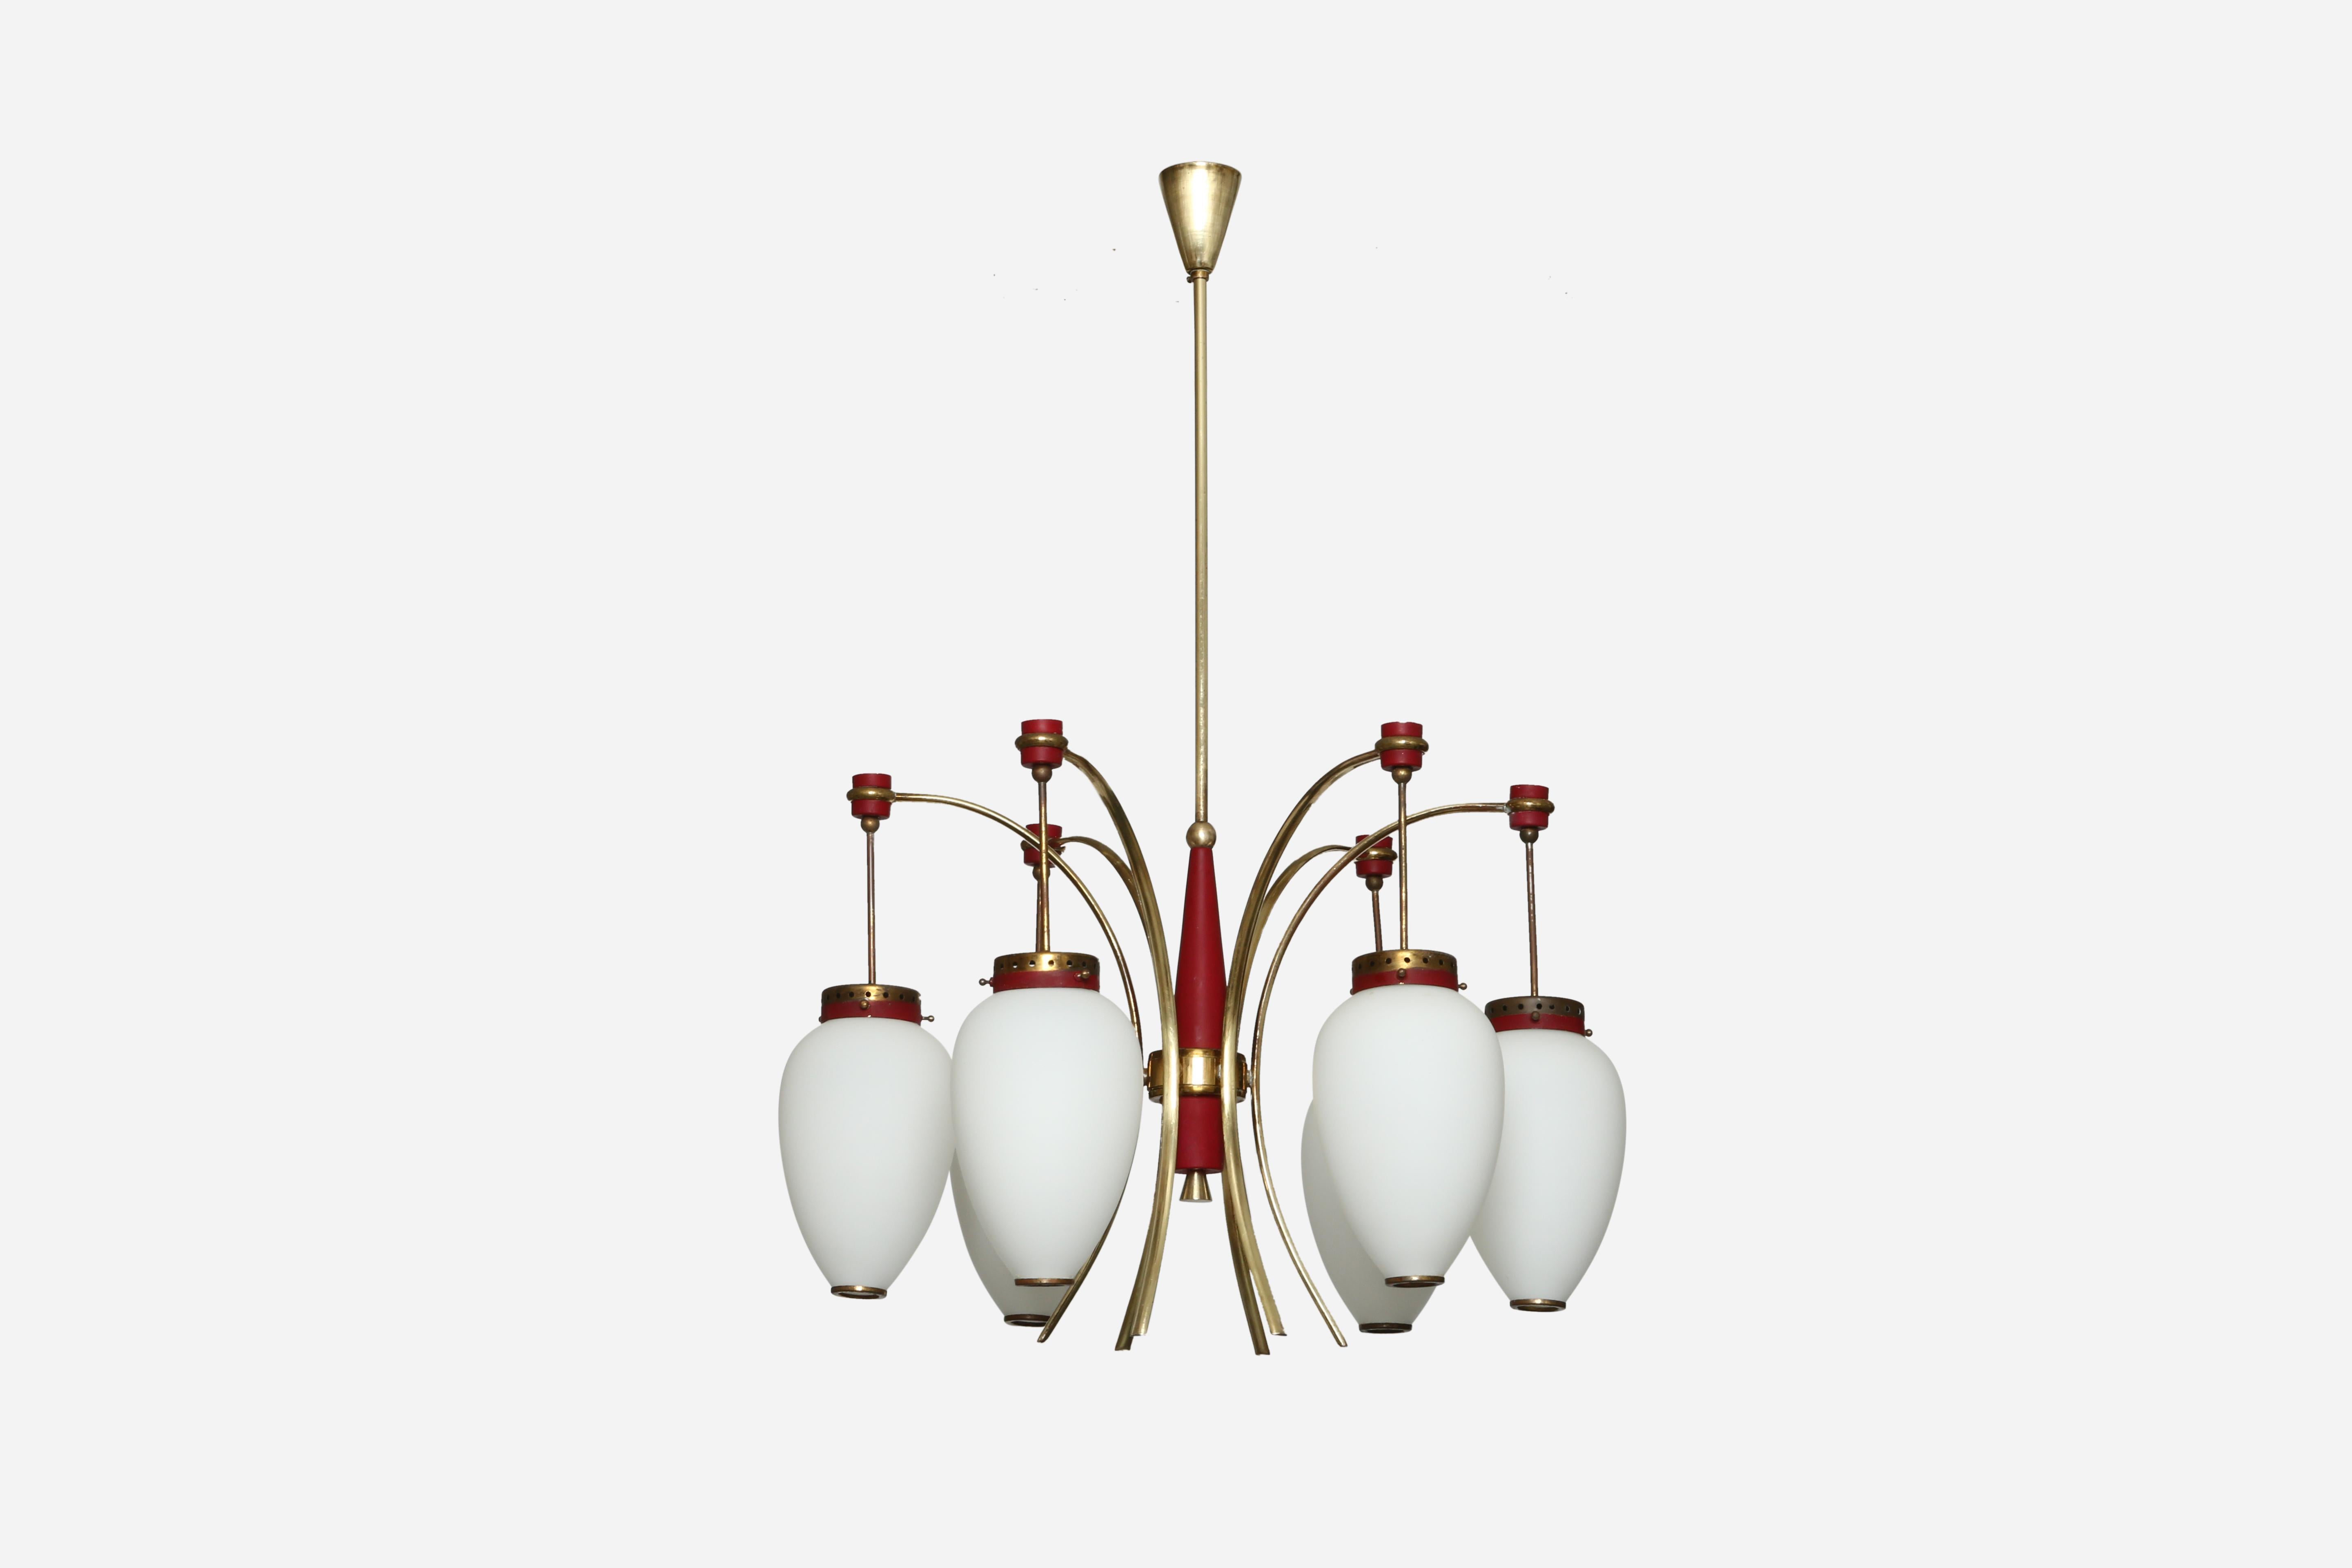 Stilnovo chandelier,
Italy, 1960s
Six glass bells.

We take pride in bringing vintage fixtures to their full glory again.
At Illustris Lighting our main focus is to deliver lighting fixtures to our clients in ready to install condition. Every item